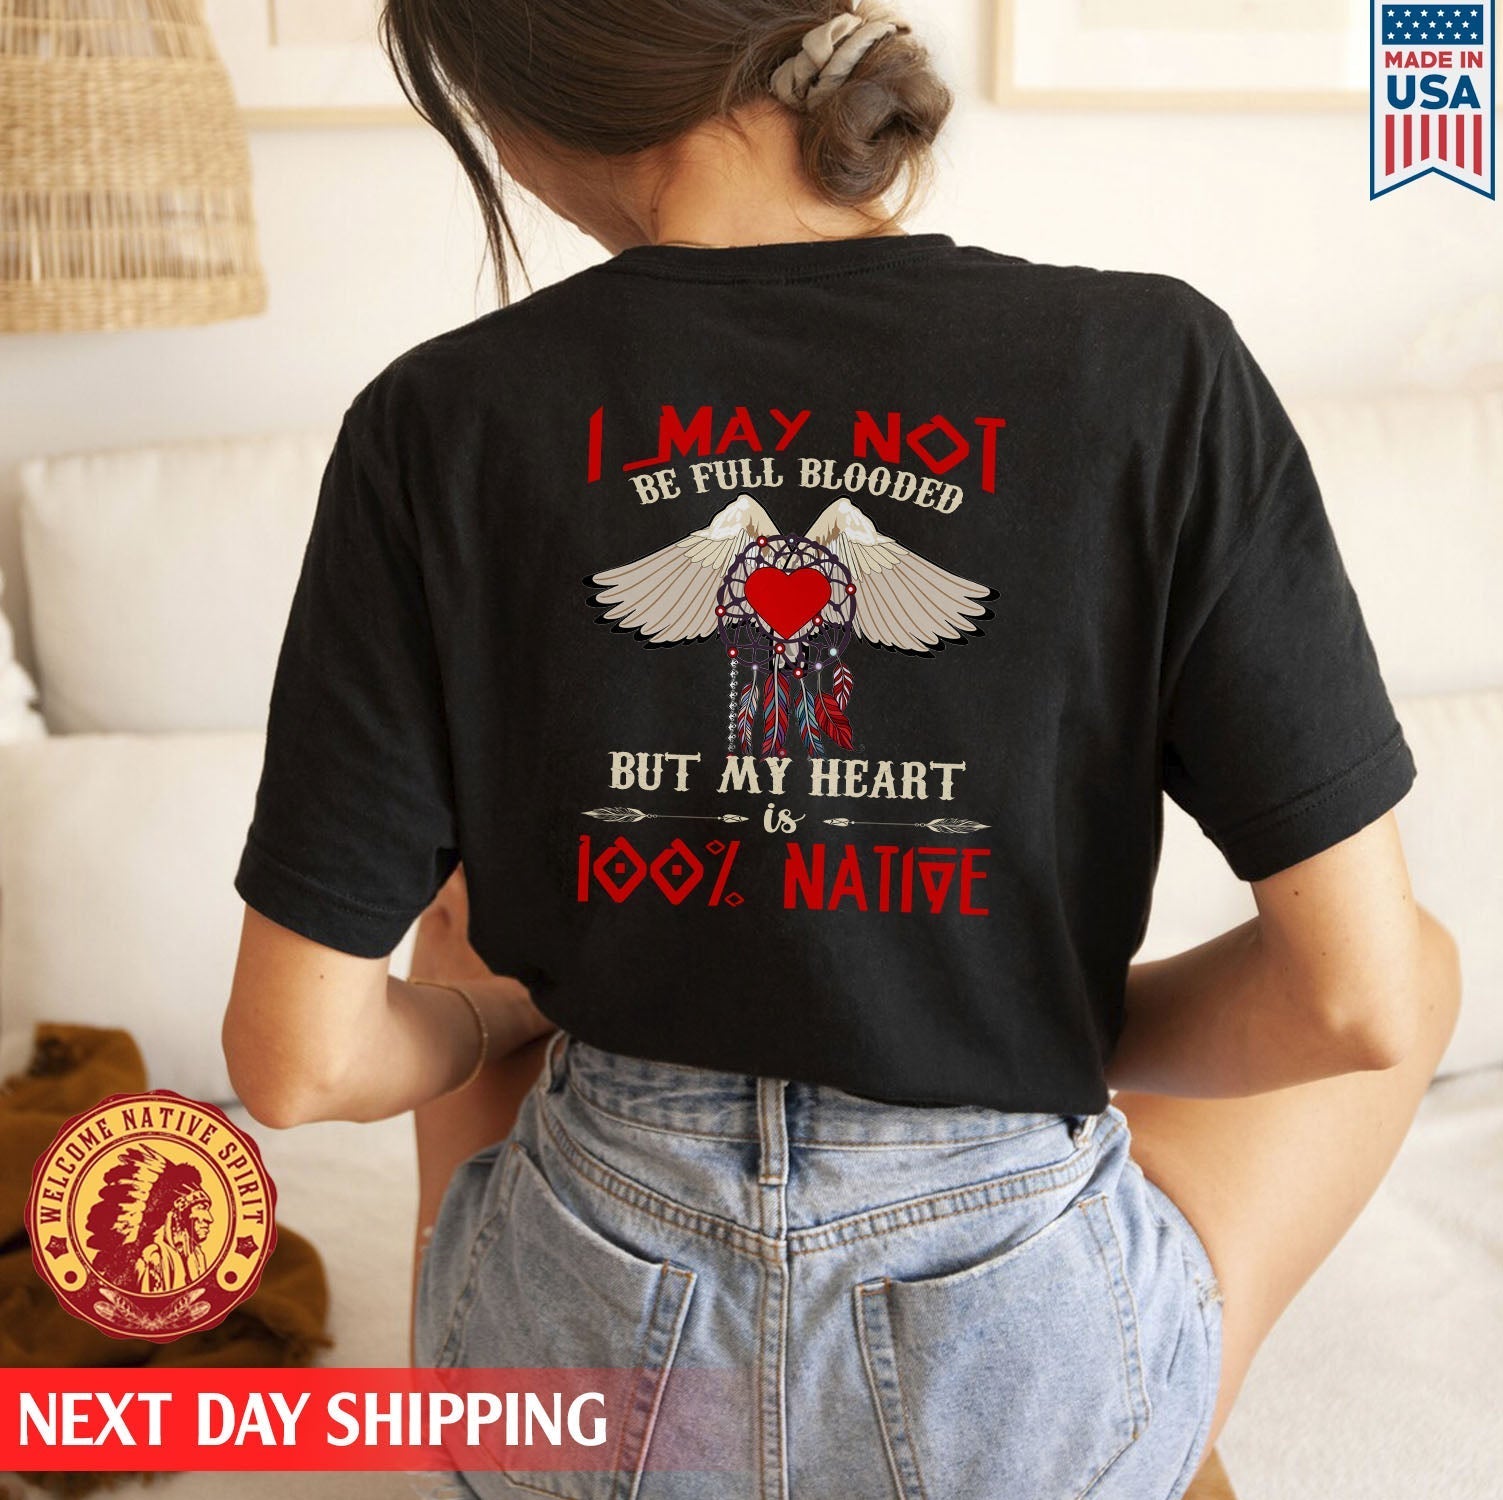 I May Not Be Full Blooded 100% Native Heart Wing Unisex Back T-Shirt/Hoodie/Sweatshirt